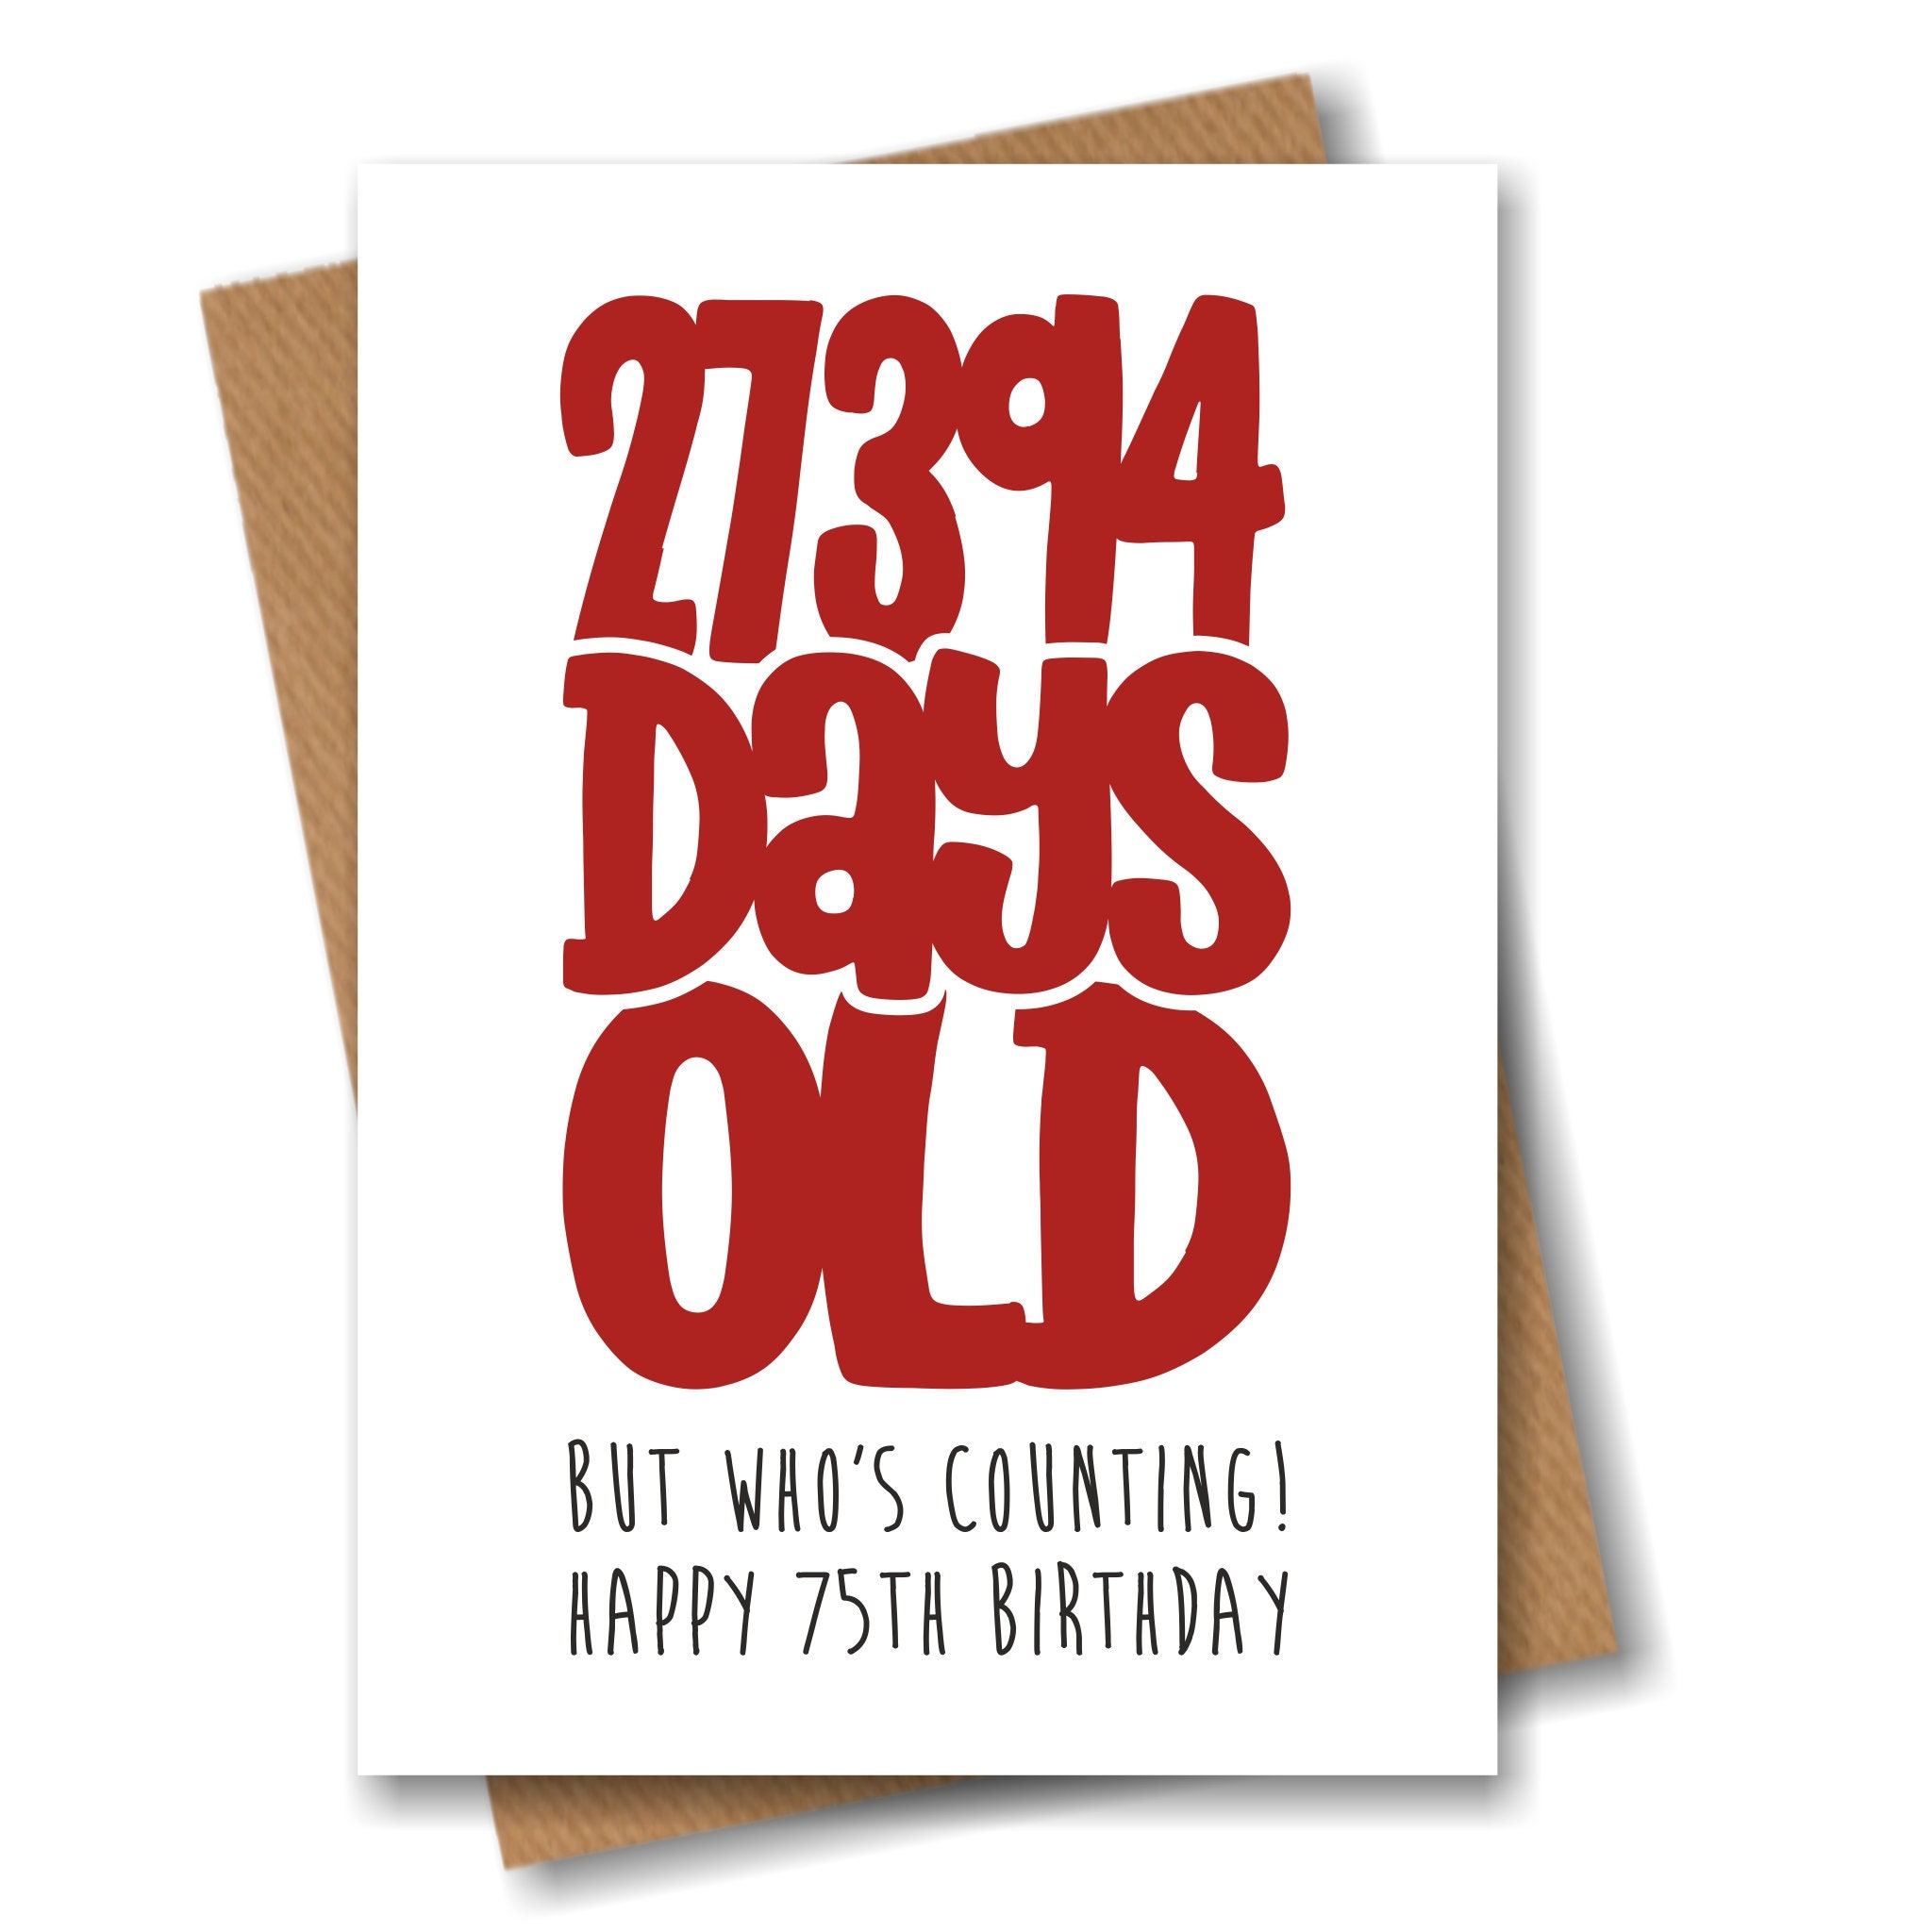 funny-75th-birthday-card-27394-days-old-but-who-s-etsy-uk